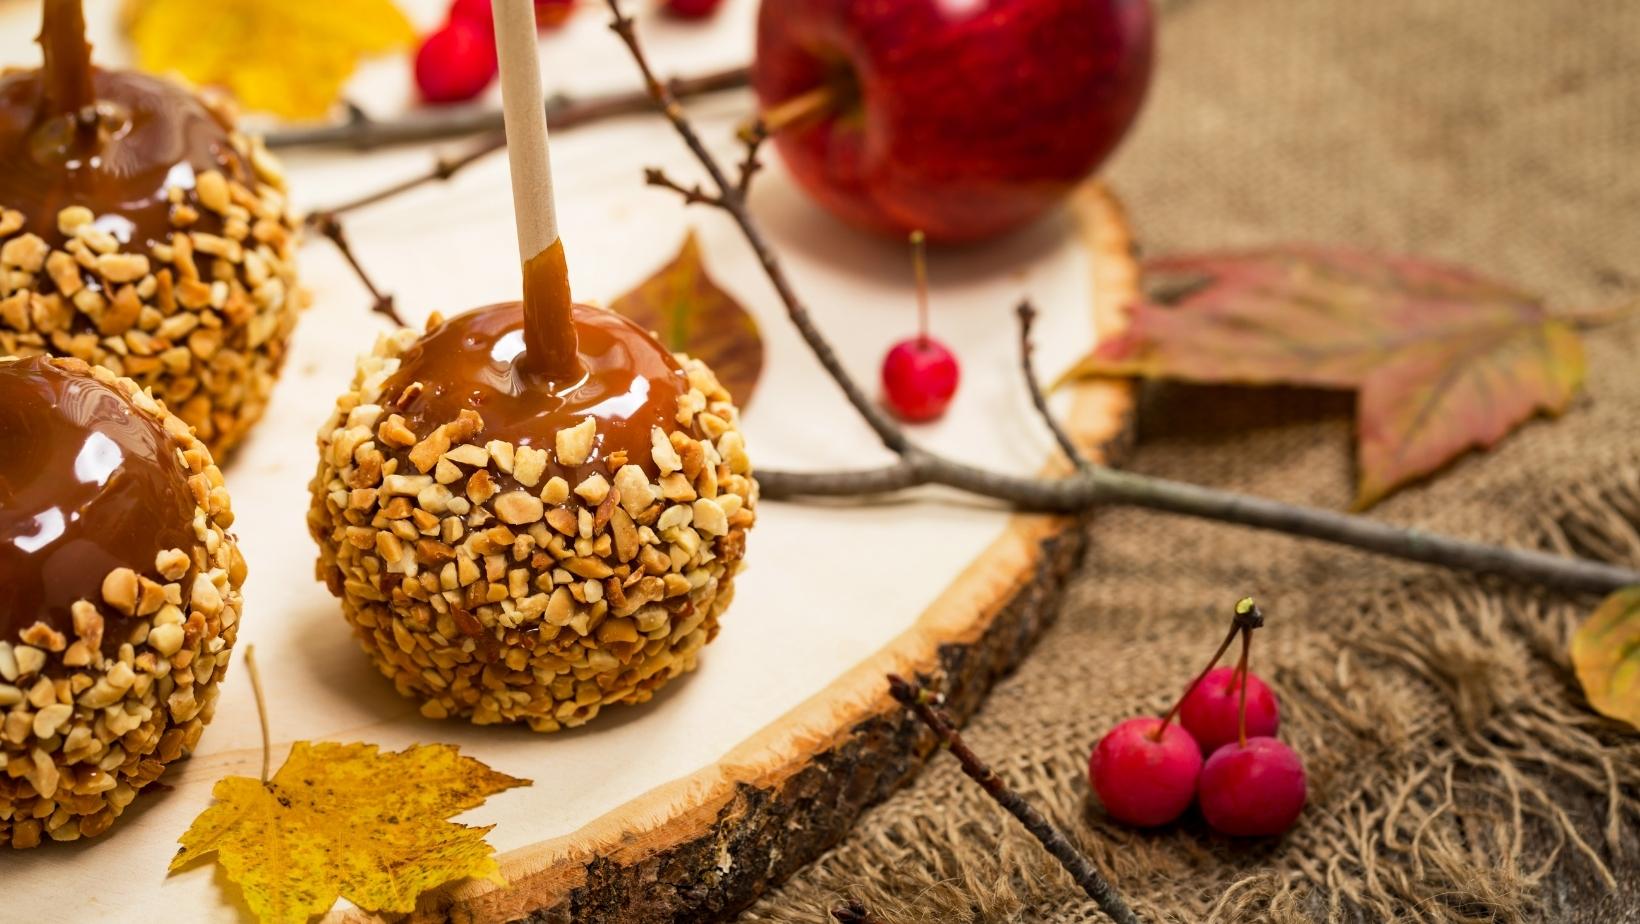 Caramel apples with nuts on a wooden cutting board on a table with fall berries and twigs